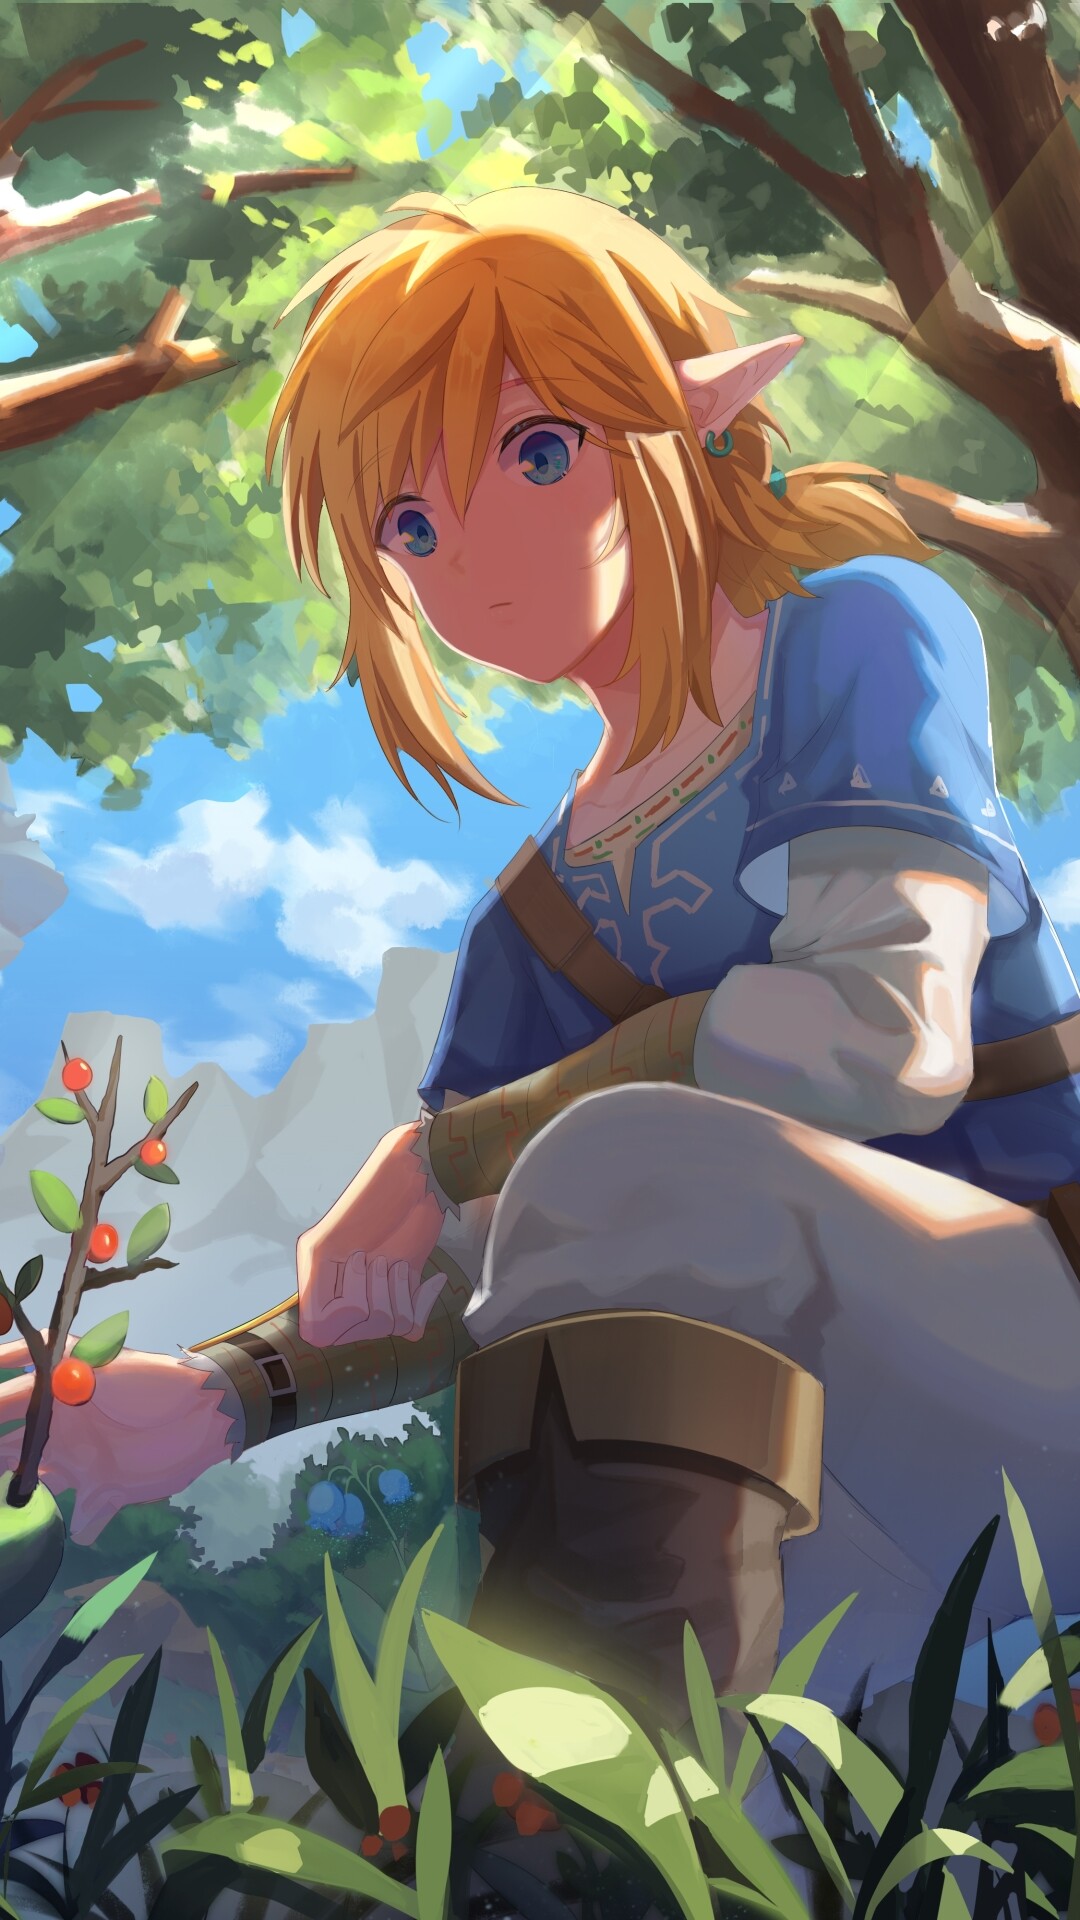 The Legend of Zelda: Link, A courageous young Hylian man, The protagonist. 1080x1920 Full HD Wallpaper.